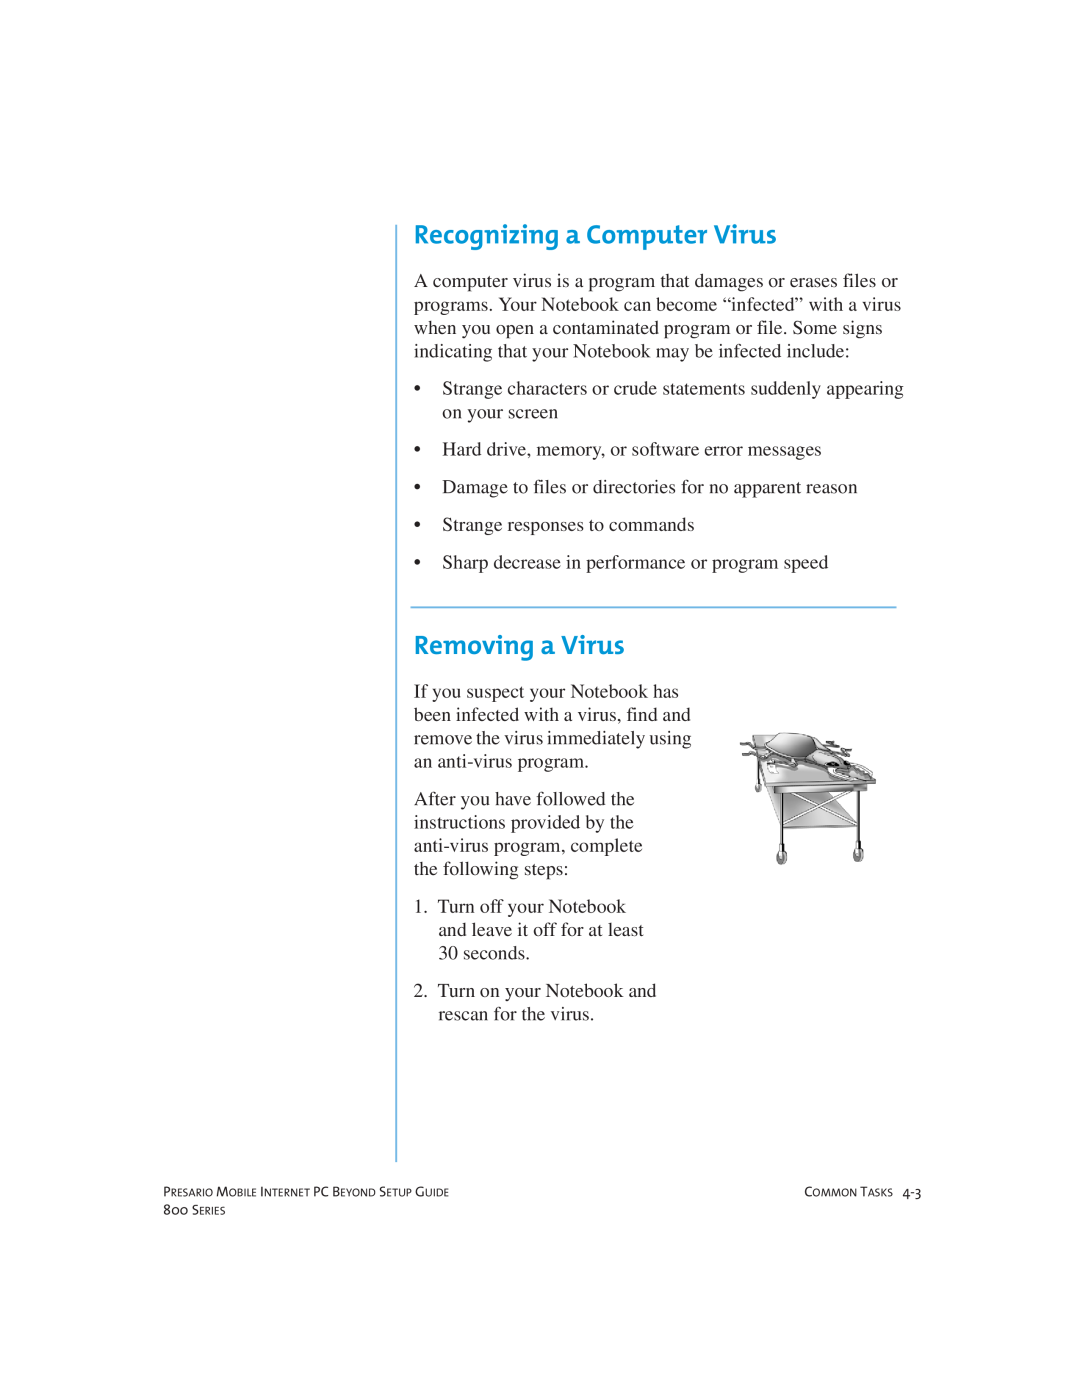 Compaq 800 manual Recognizing a Computer Virus, Removing a Virus 